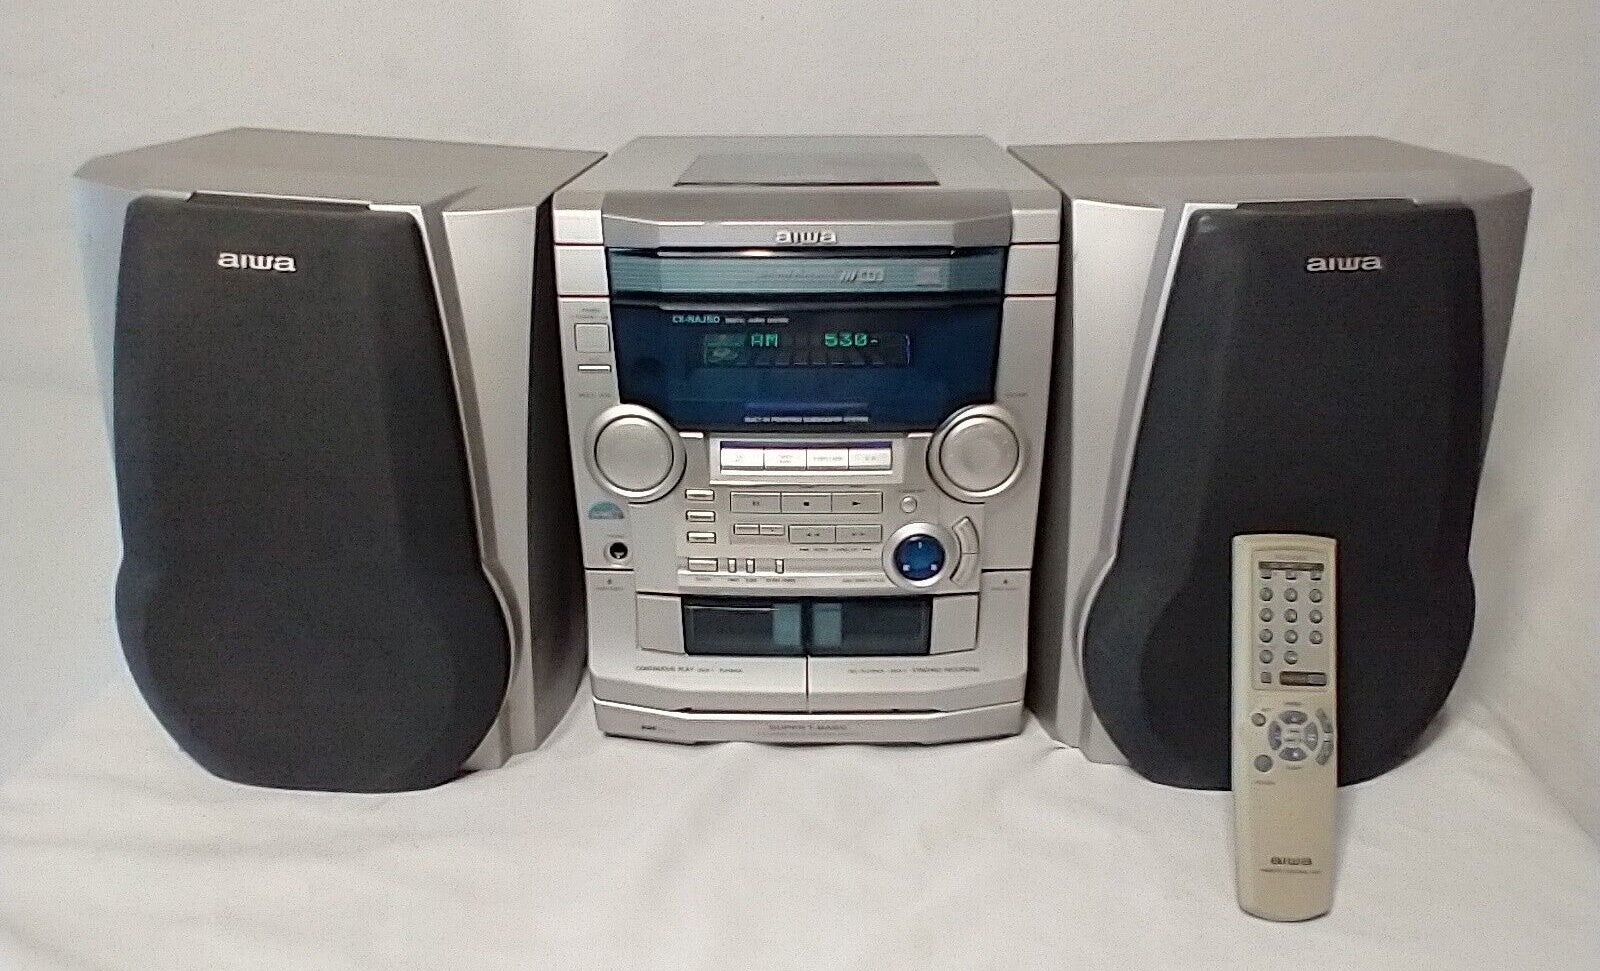 Aiwa stereo system with two speakers and a remote control from the late 1990s to early 2000s